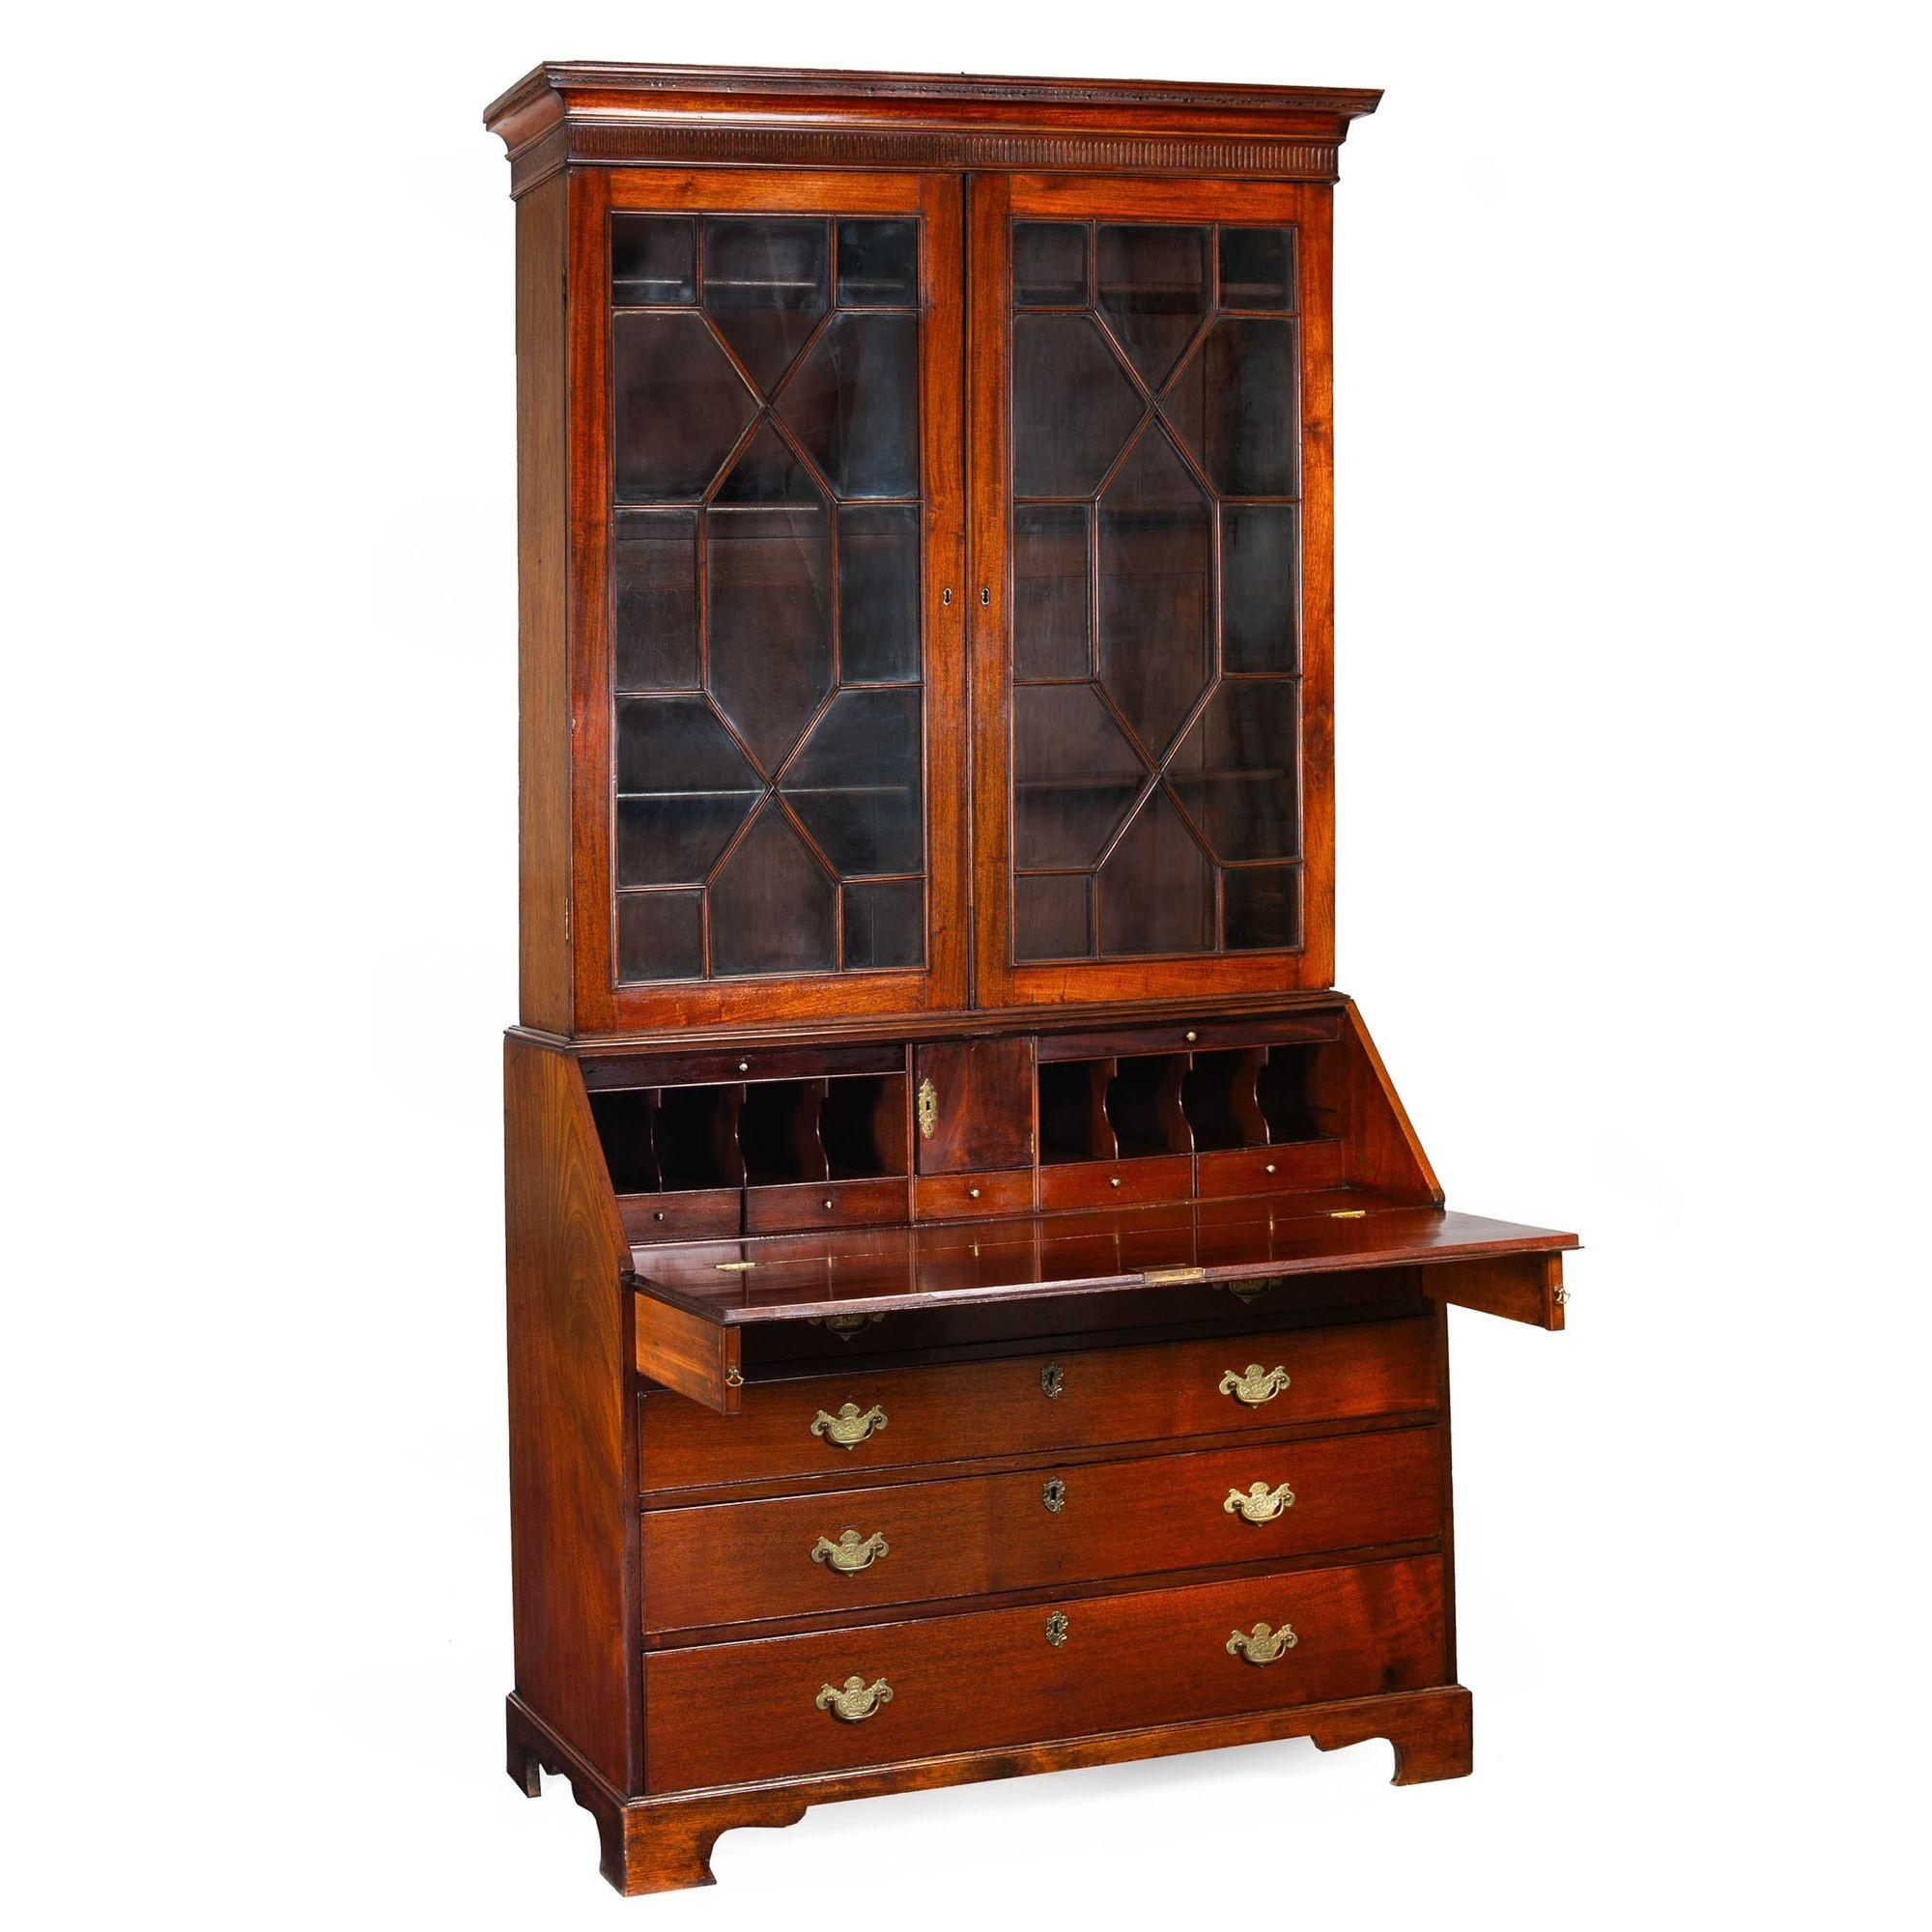 GEORGE III MAHOGANY SECRETARY DESK AND BOOKCASE
England, circa last quarter of the 18th century
Item # 305PKI25A 

An incredibly beautiful George III mahogany fall-front secretary desk and bookcase, it has remained in a private collection for nearly